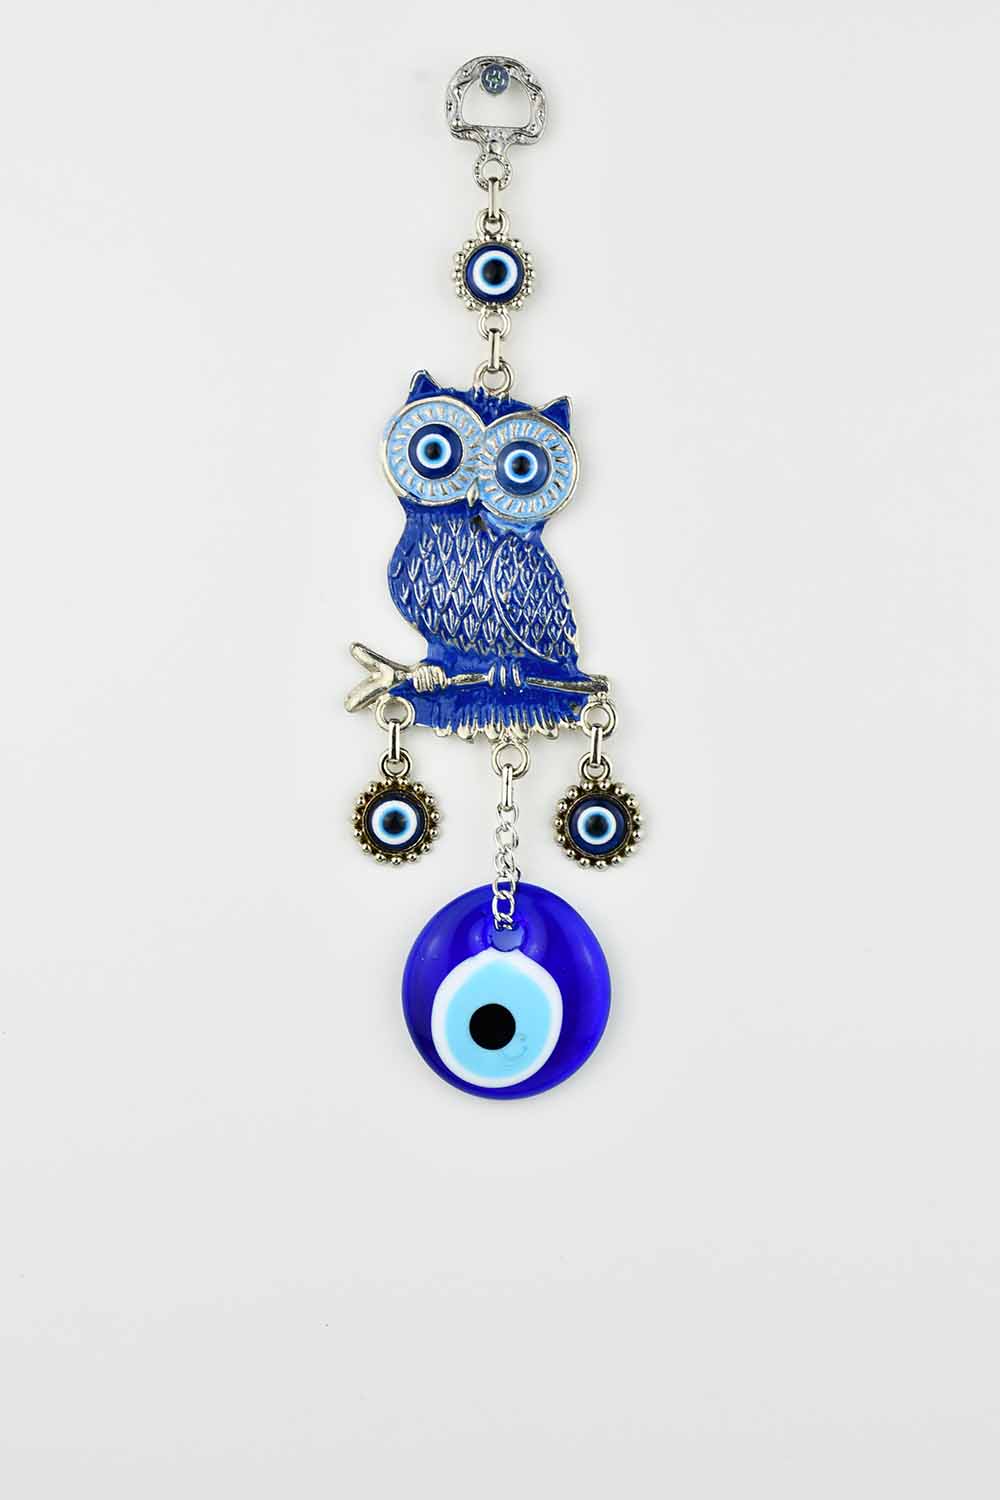 evil eye wall ornament in owl design handpainted in blue colour.